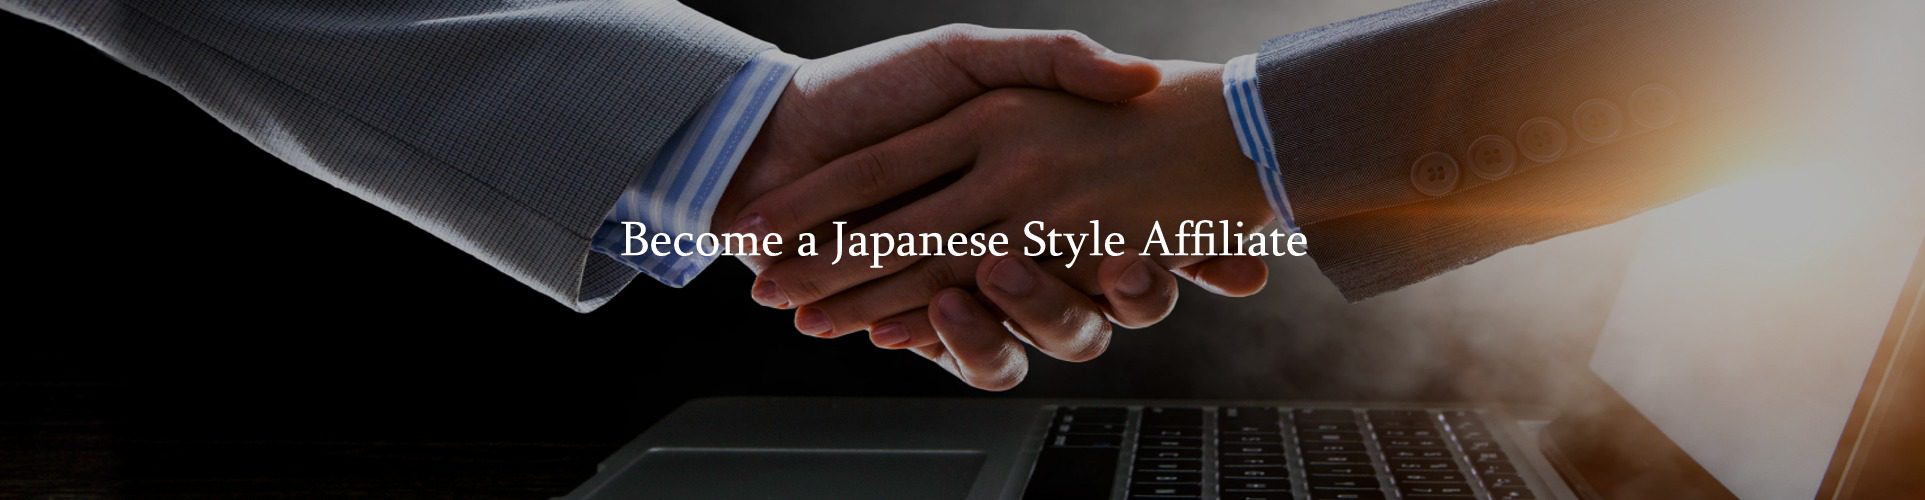 Become a Japanese Style Affiliate